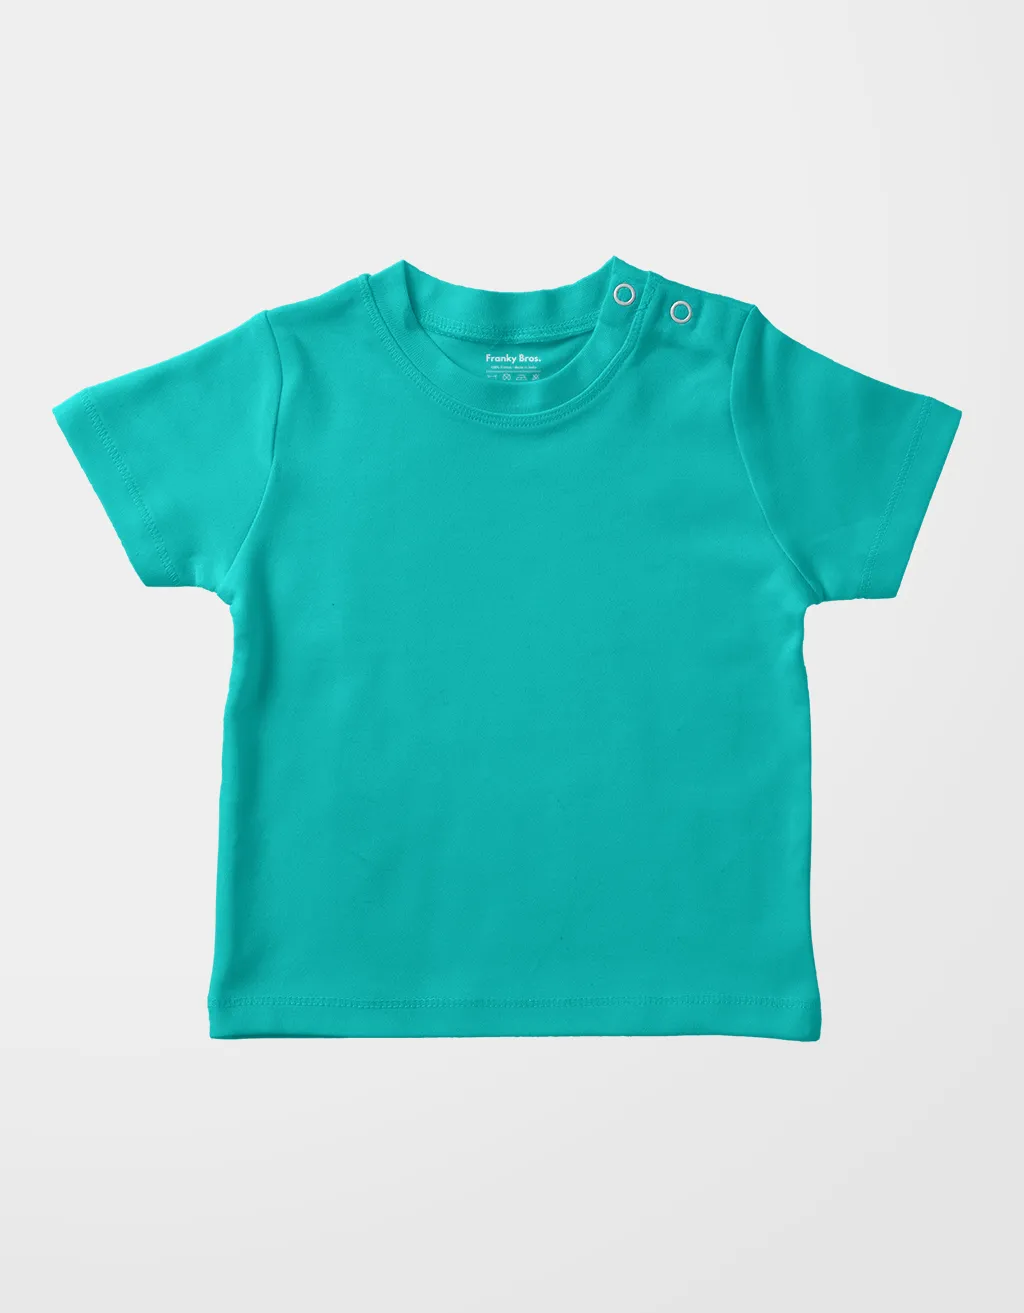 teal blue baby t shirt for baby boy and girl best site for baby clothes in india